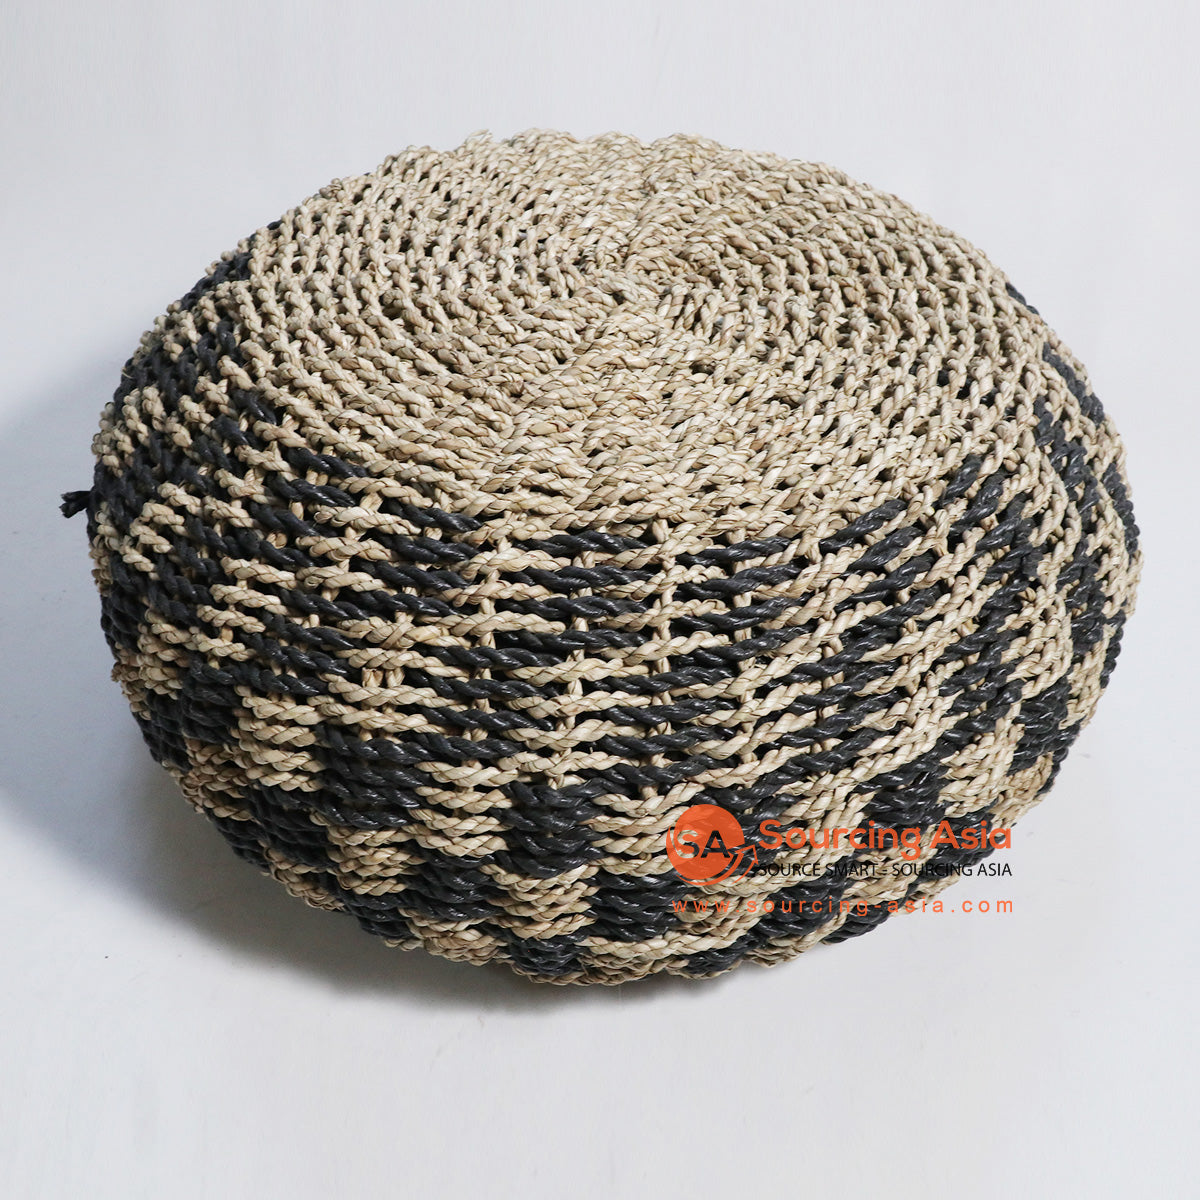 HBSC142-2 NATURAL AND BLACK SEAGRASS FOOT POUFFE